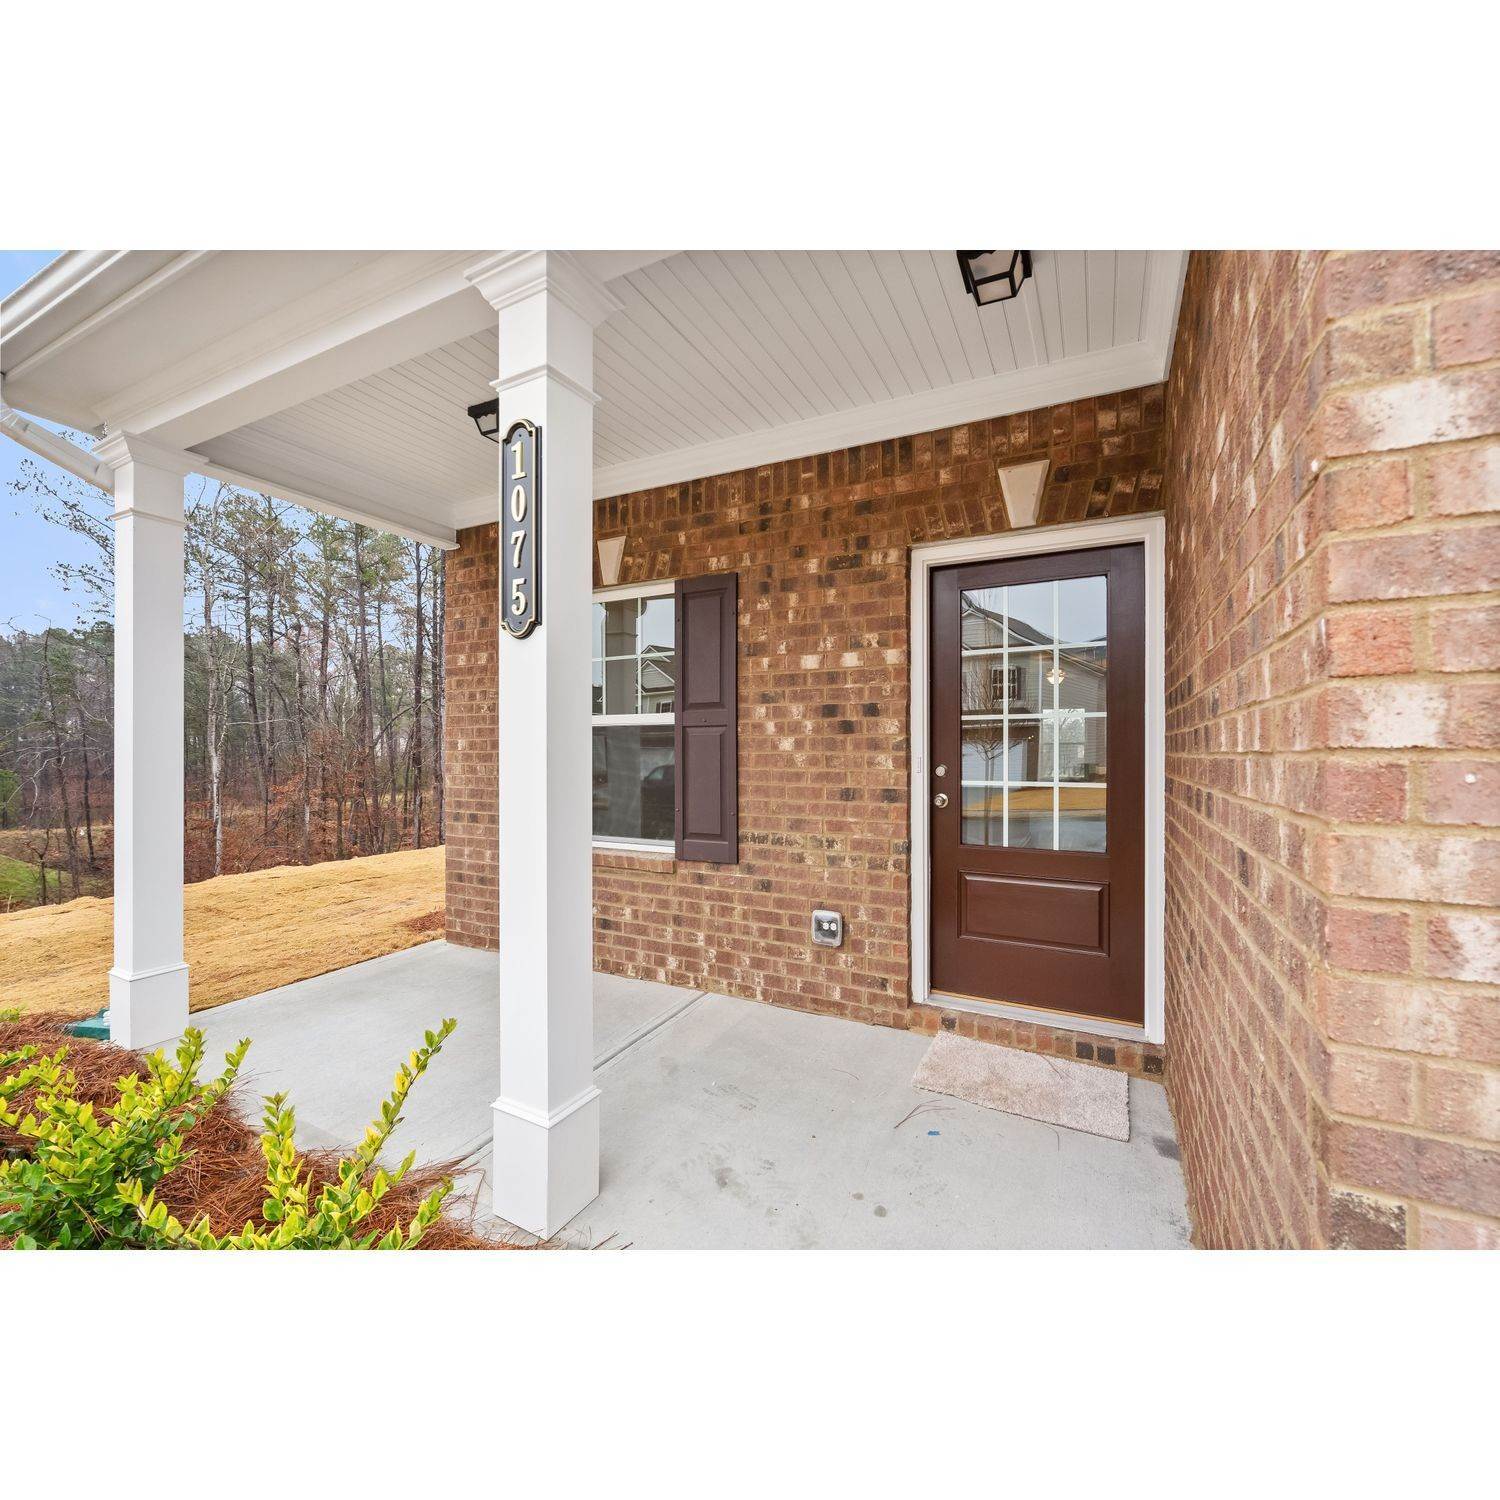 26. Cottages At Moores Mill building at 104 Mill Valley Way, New Market, AL 35761